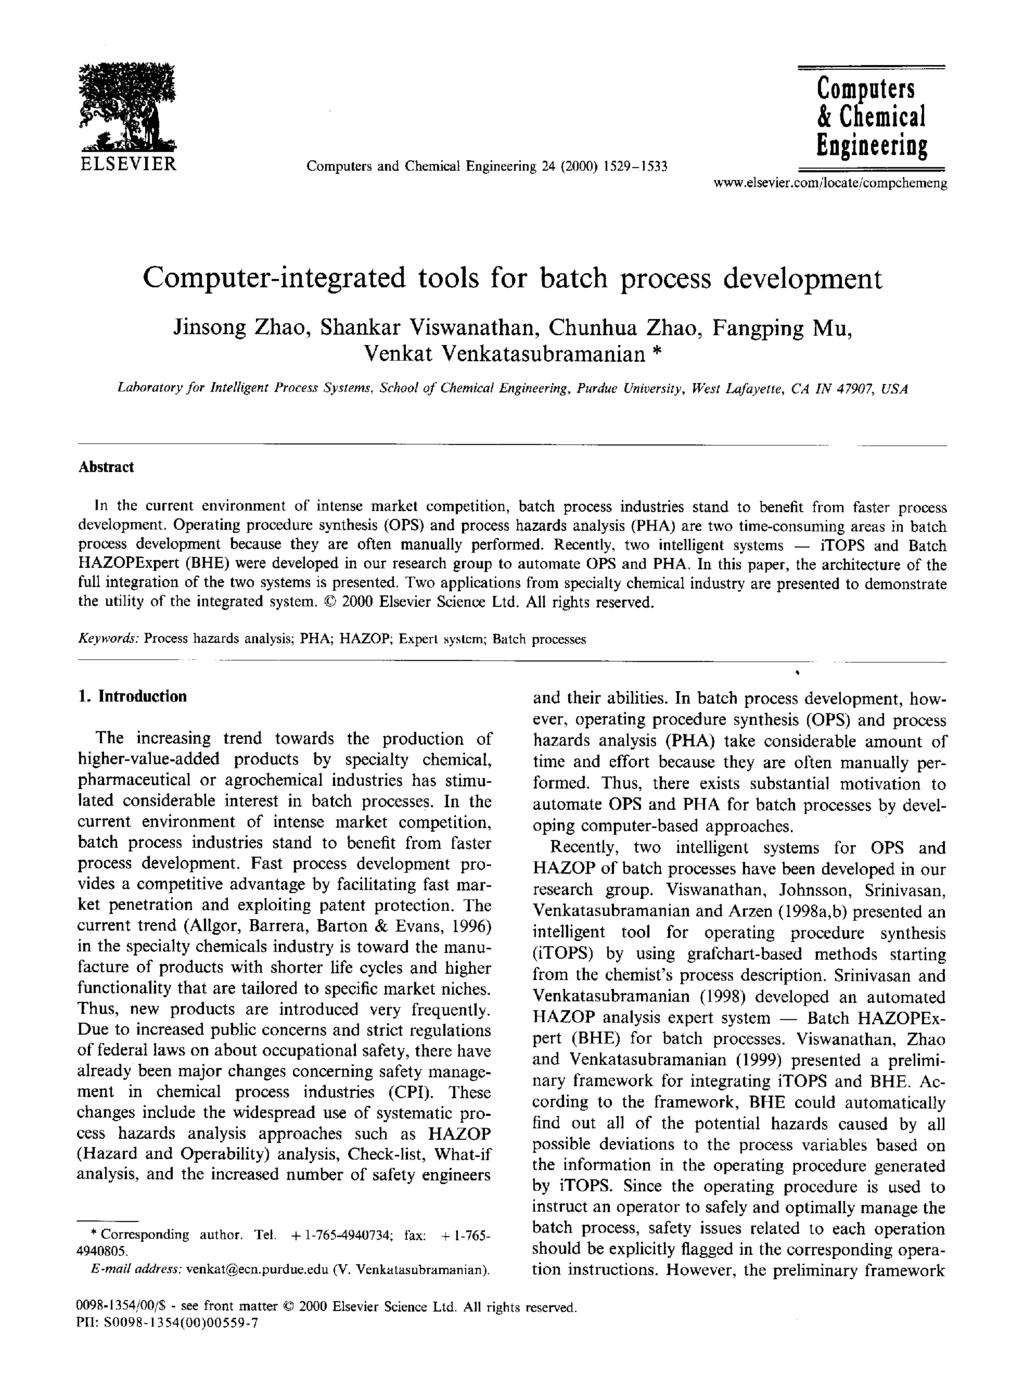 ELSEVER Computers and Chemical Engineering 24 (2000) 1529-1533 Computers & Chemical Engineering www.elsevier.